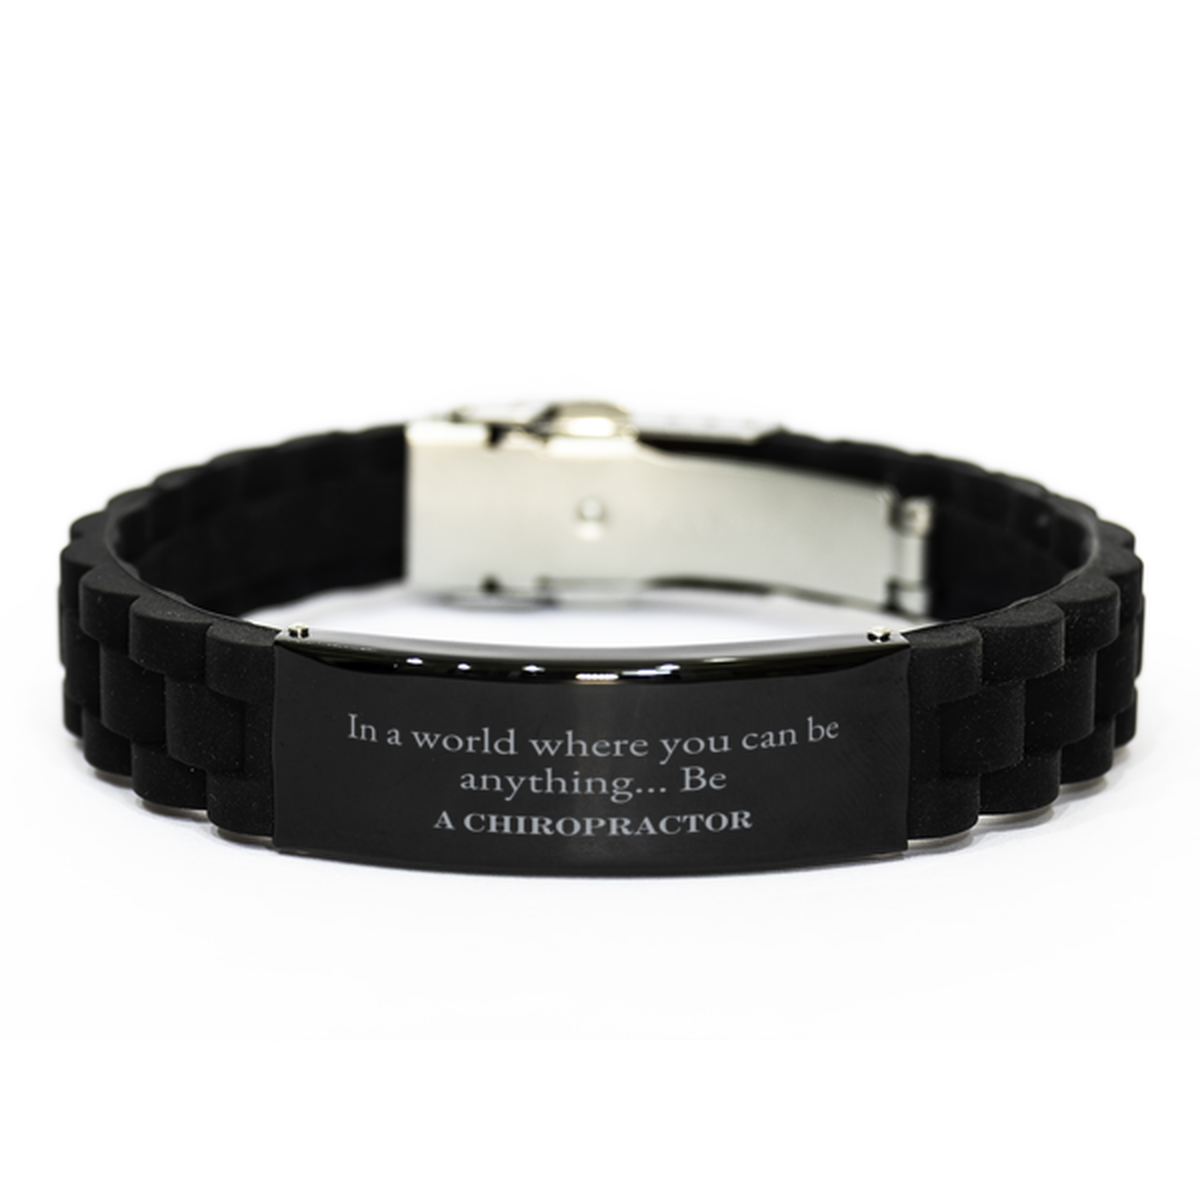 Gifts for Chiropractor, In a world where you can be anything, Appreciation Birthday Black Glidelock Clasp Bracelet for Men, Women, Friends, Coworkers